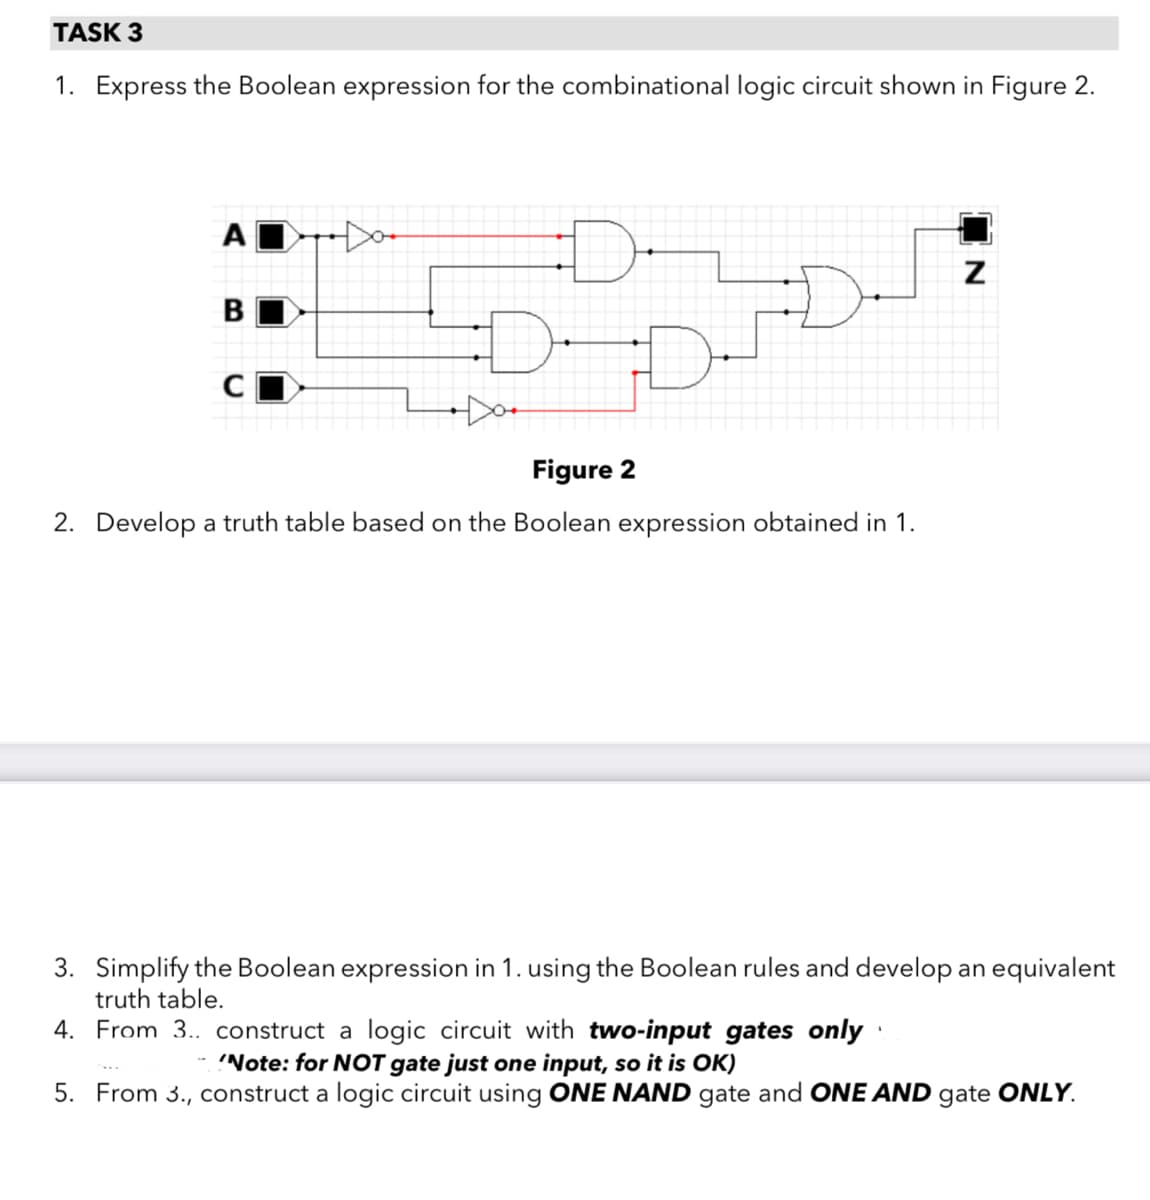 TASK 3
1. Express the Boolean expression for the combinational logic circuit shown in Figure 2.
A
Figure 2
2. Develop a truth table based on the Boolean expression obtained in 1.
3. Simplify the Boolean expression in 1. using the Boolean rules and develop an equivalent
truth table.
4. From 3. construct a logic circuit with two-input gates only
'Note: for NOT gate just one input, so it is OK)
5. From 3., construct a logic circuit using ONE NAND gate and ONE AND gate ONLY.
IN
